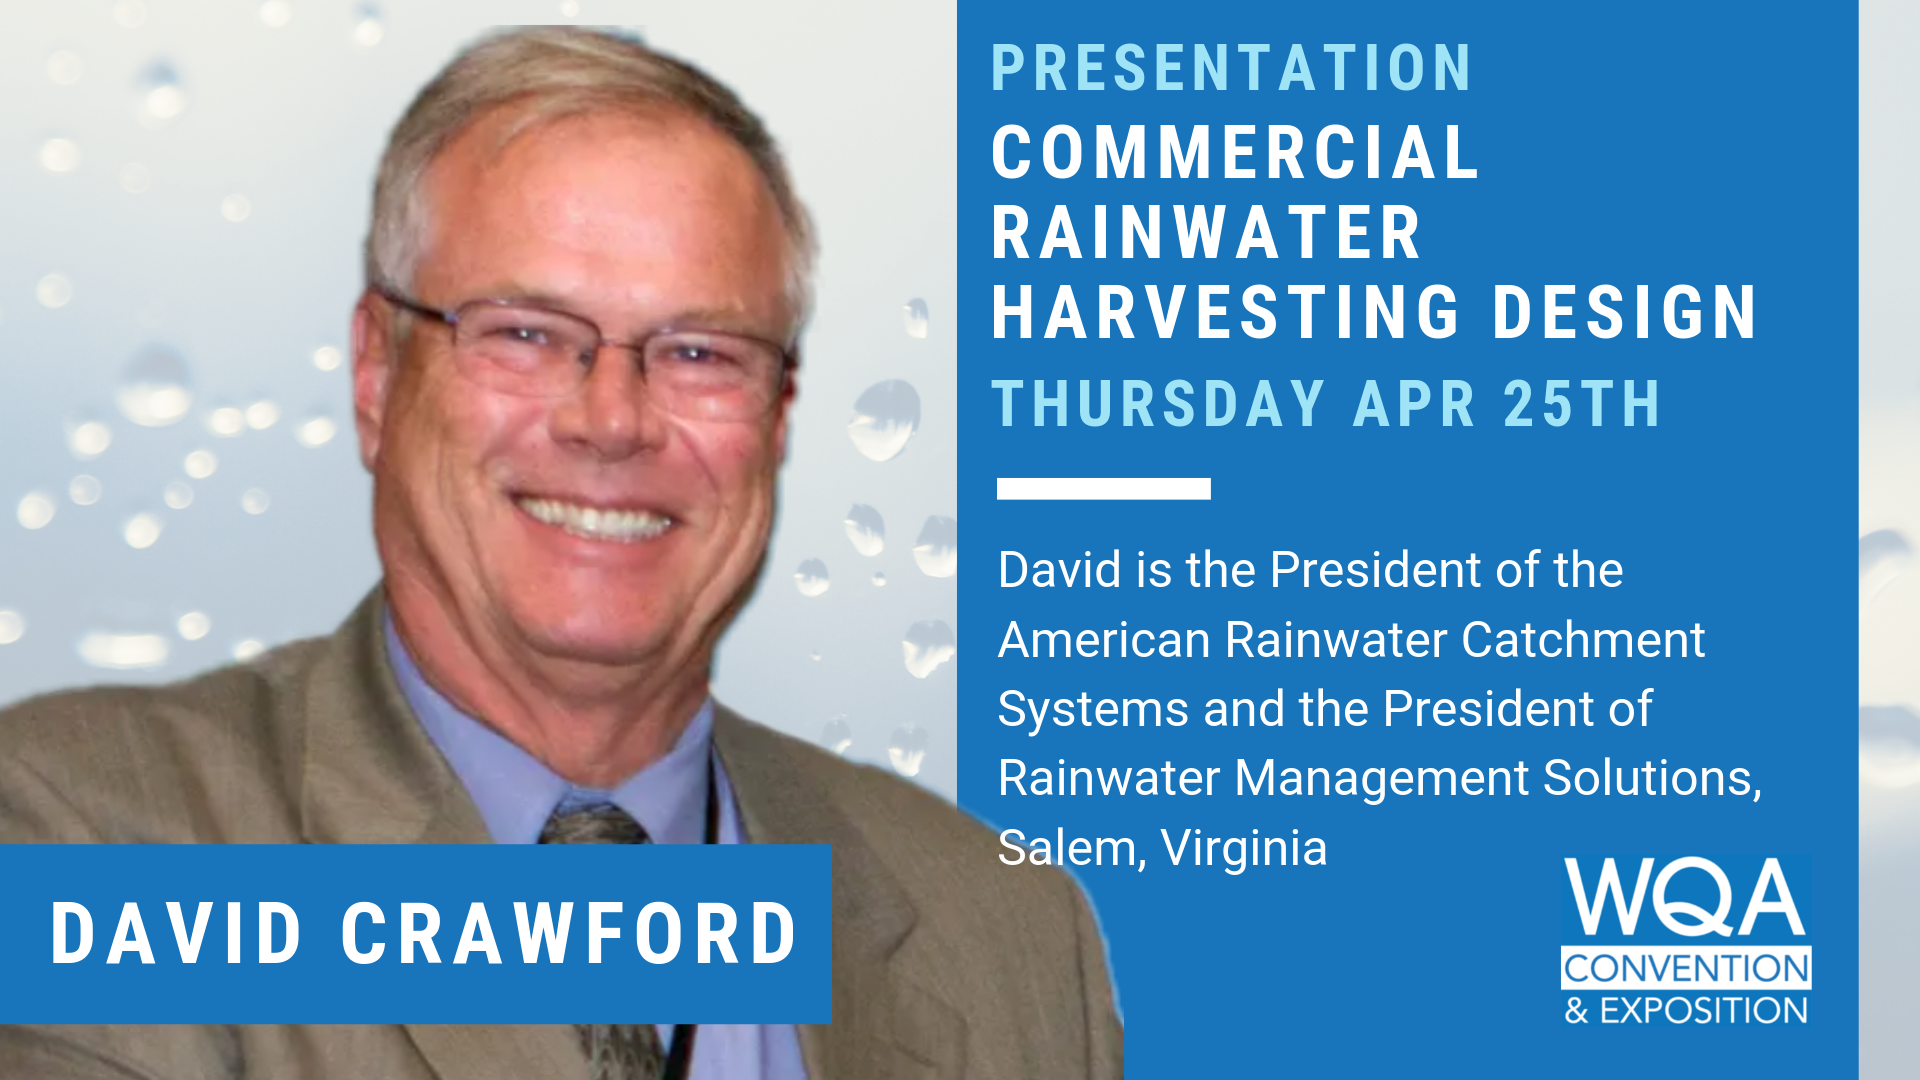 David Crawford RMS President to present at the WQA Convention | Press Release